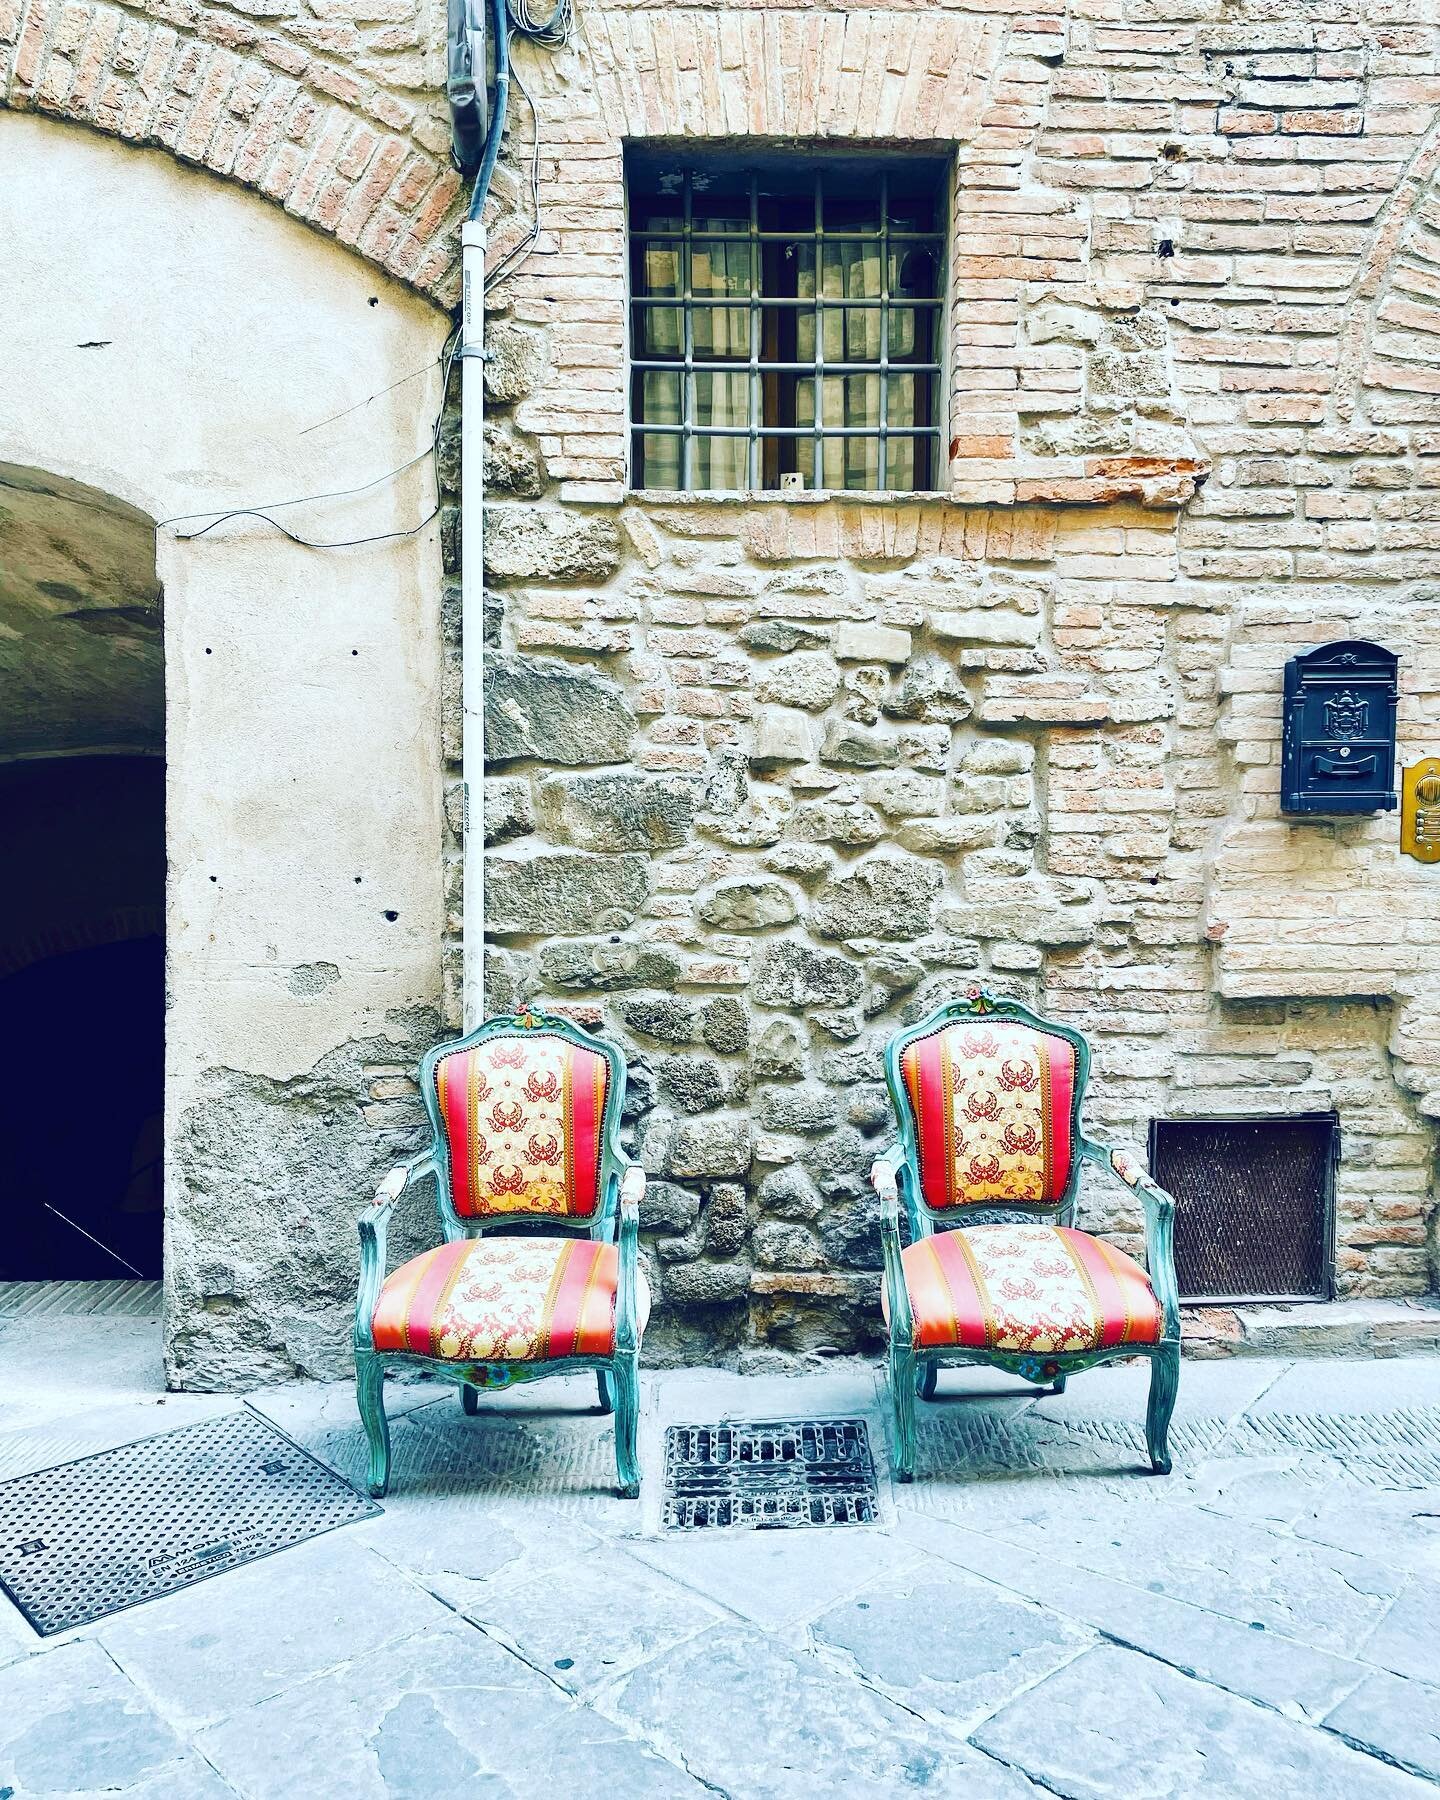 Chairs on the street #tuscany